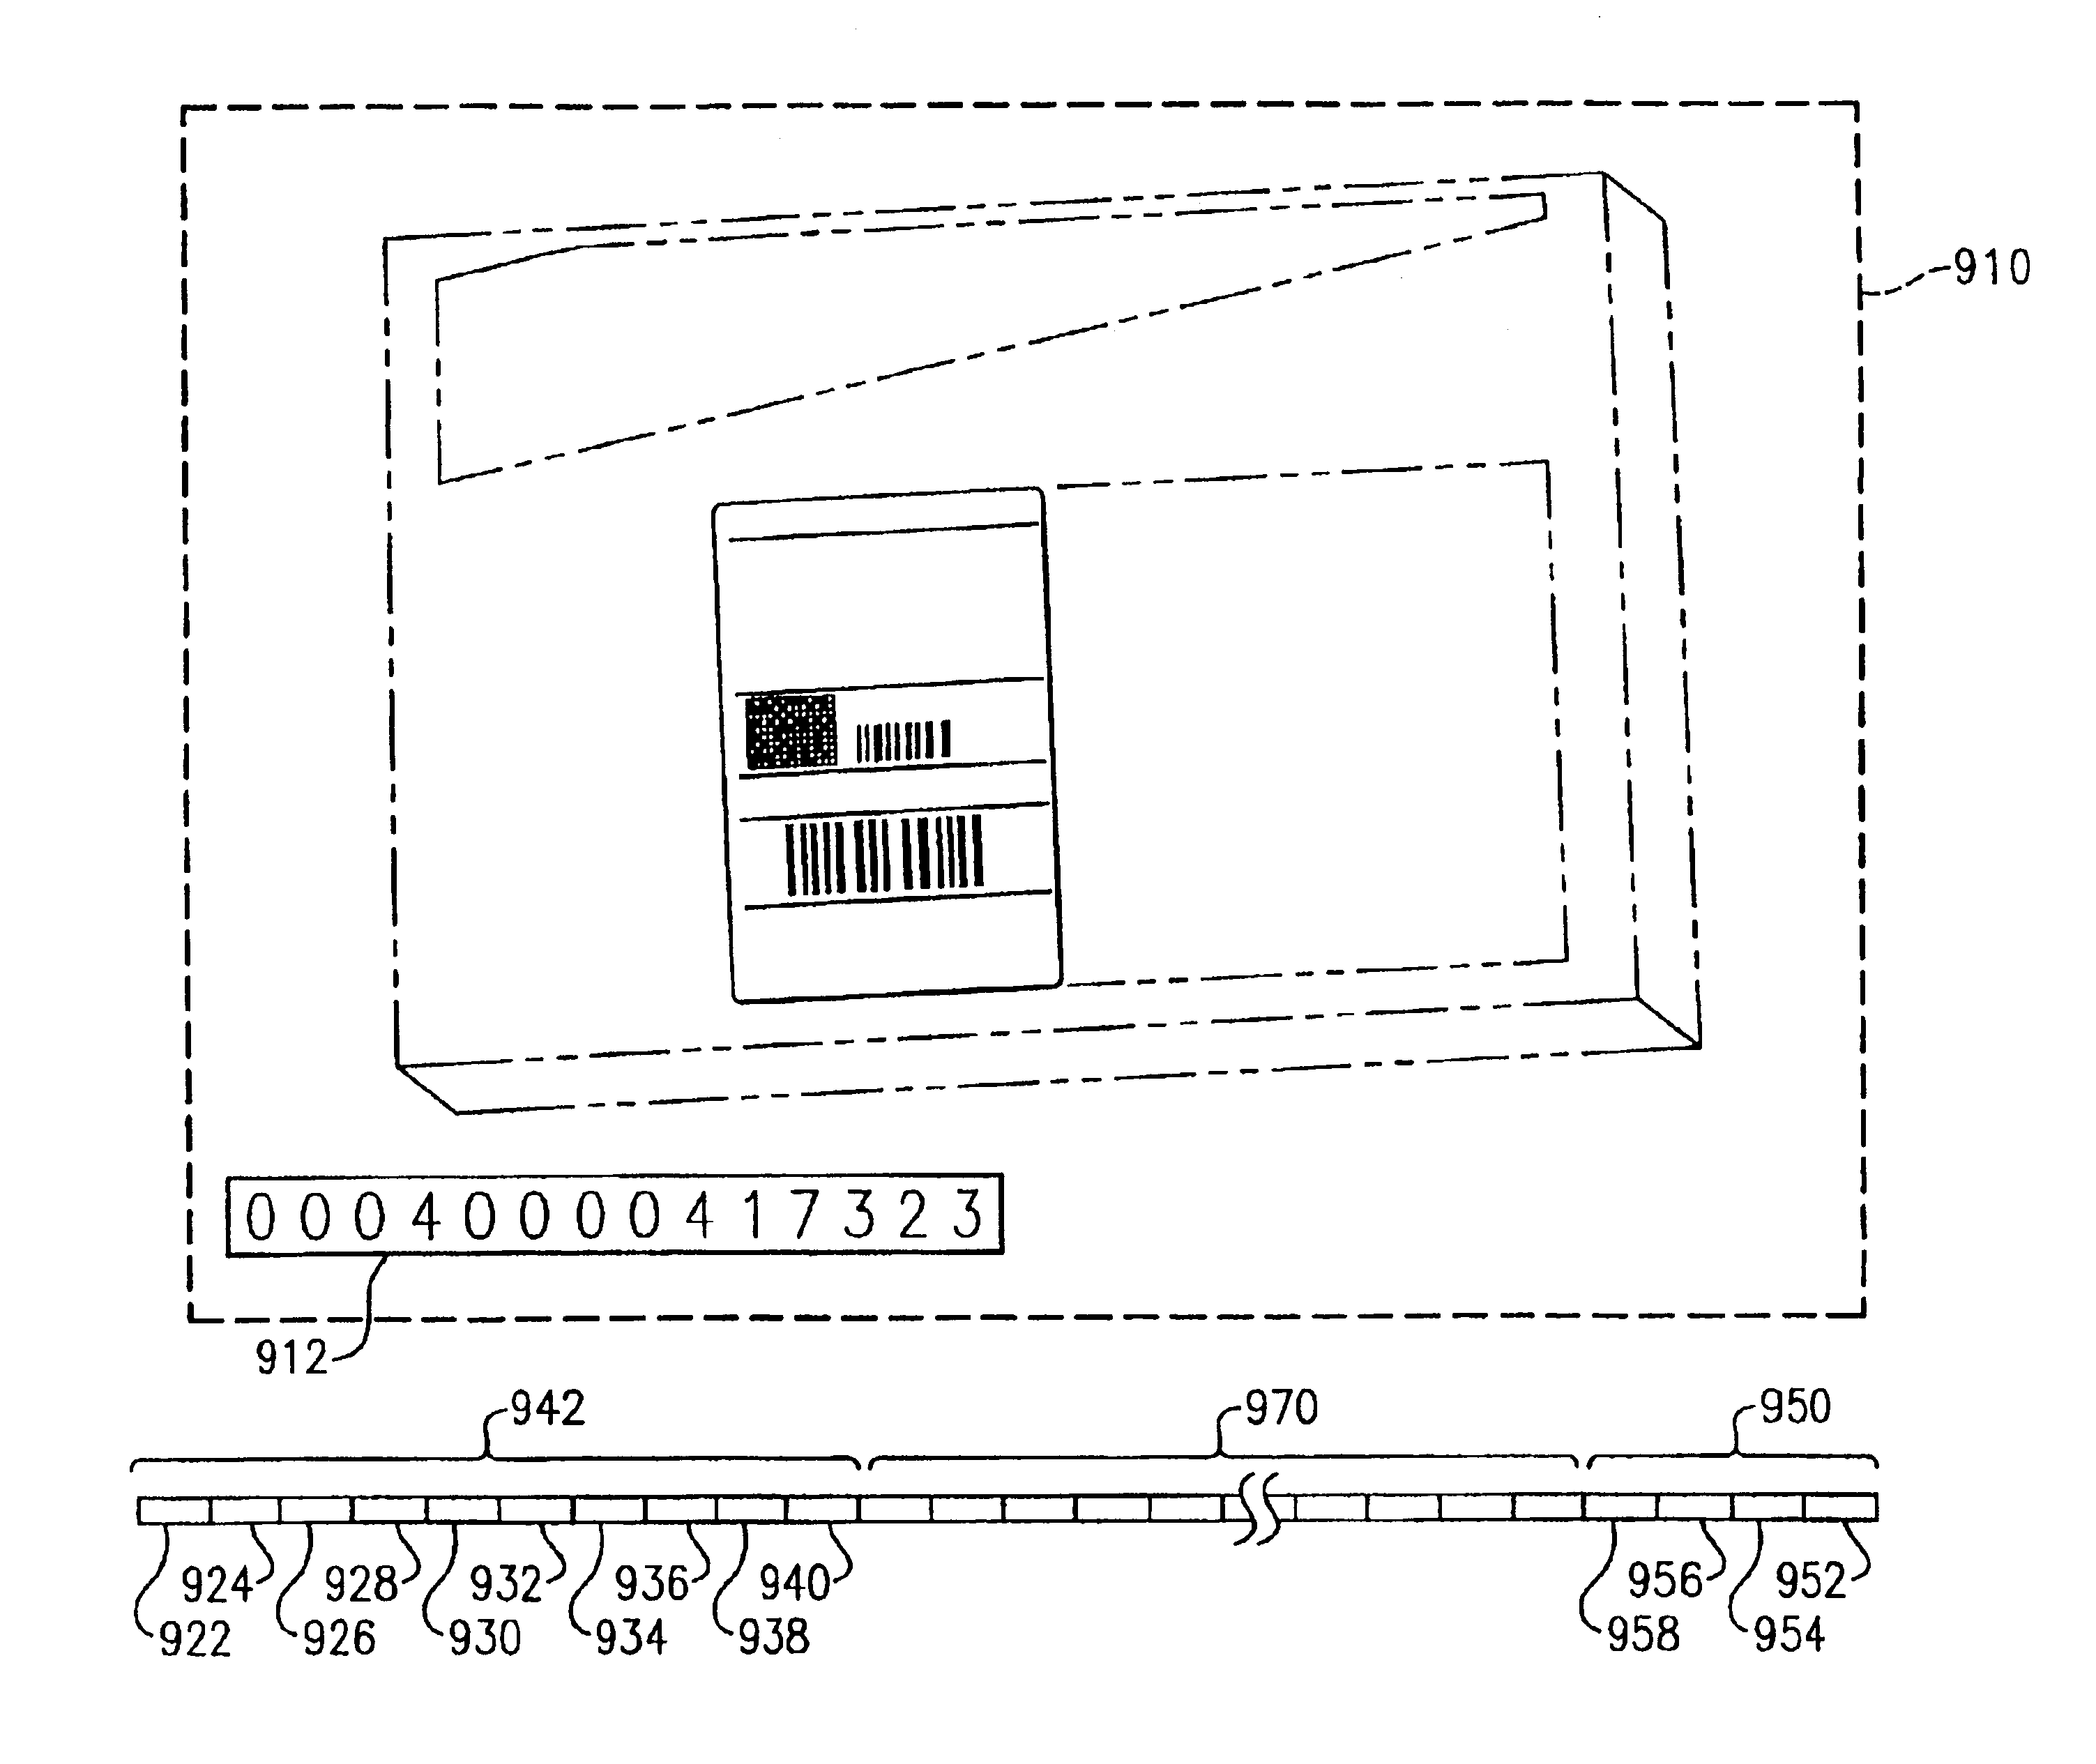 Optical reader having decoding and image capturing functionality